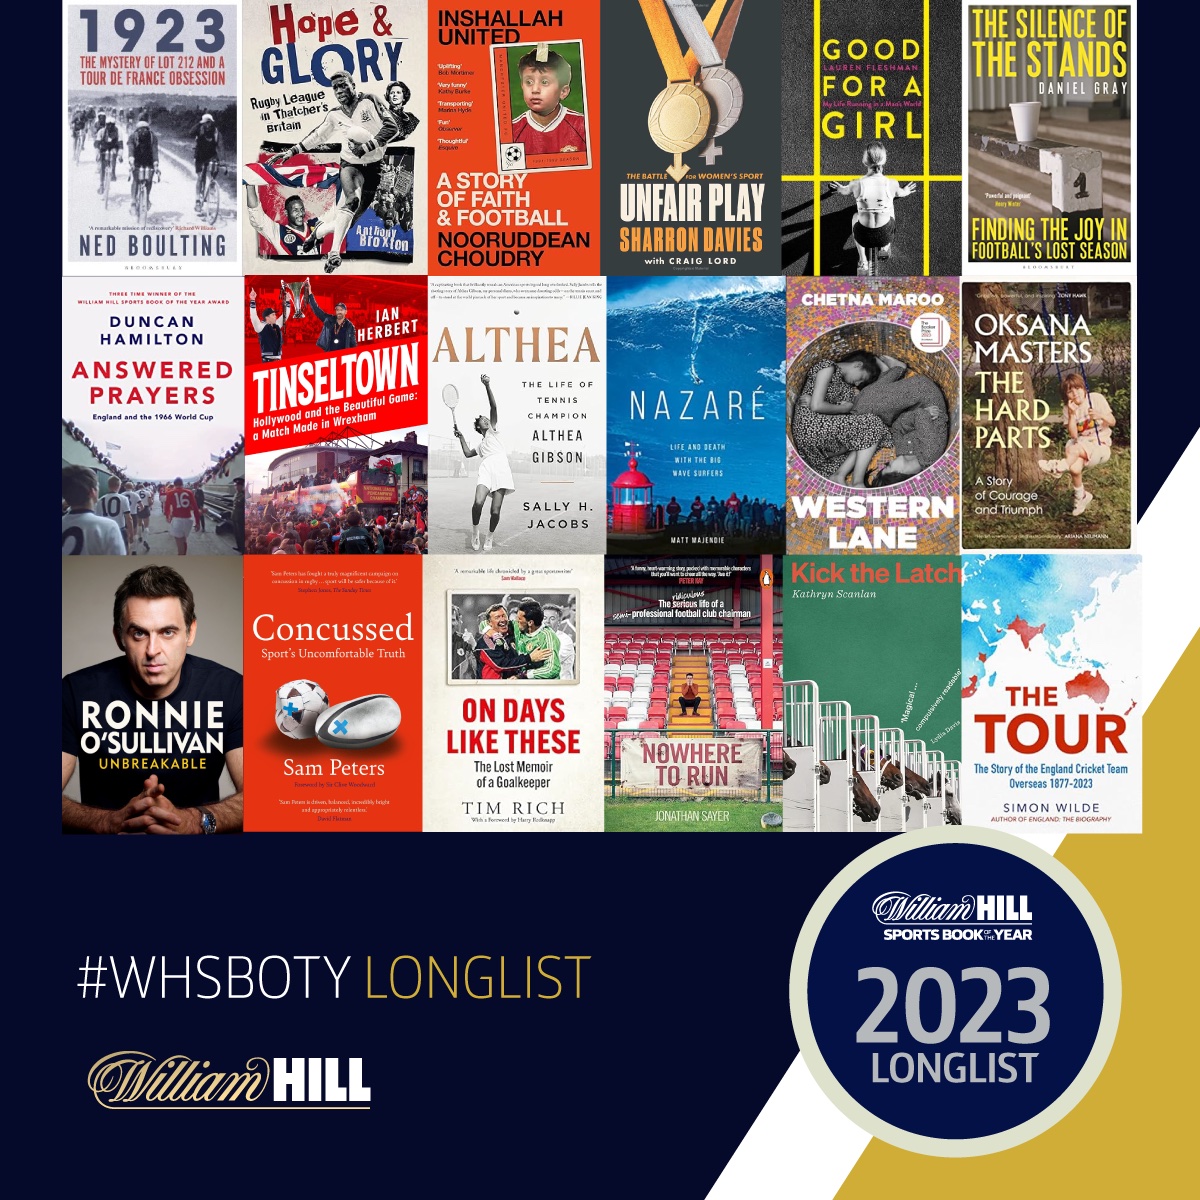 Longlist Revealed For The William Hill Sports Book of the Year 2023 Award